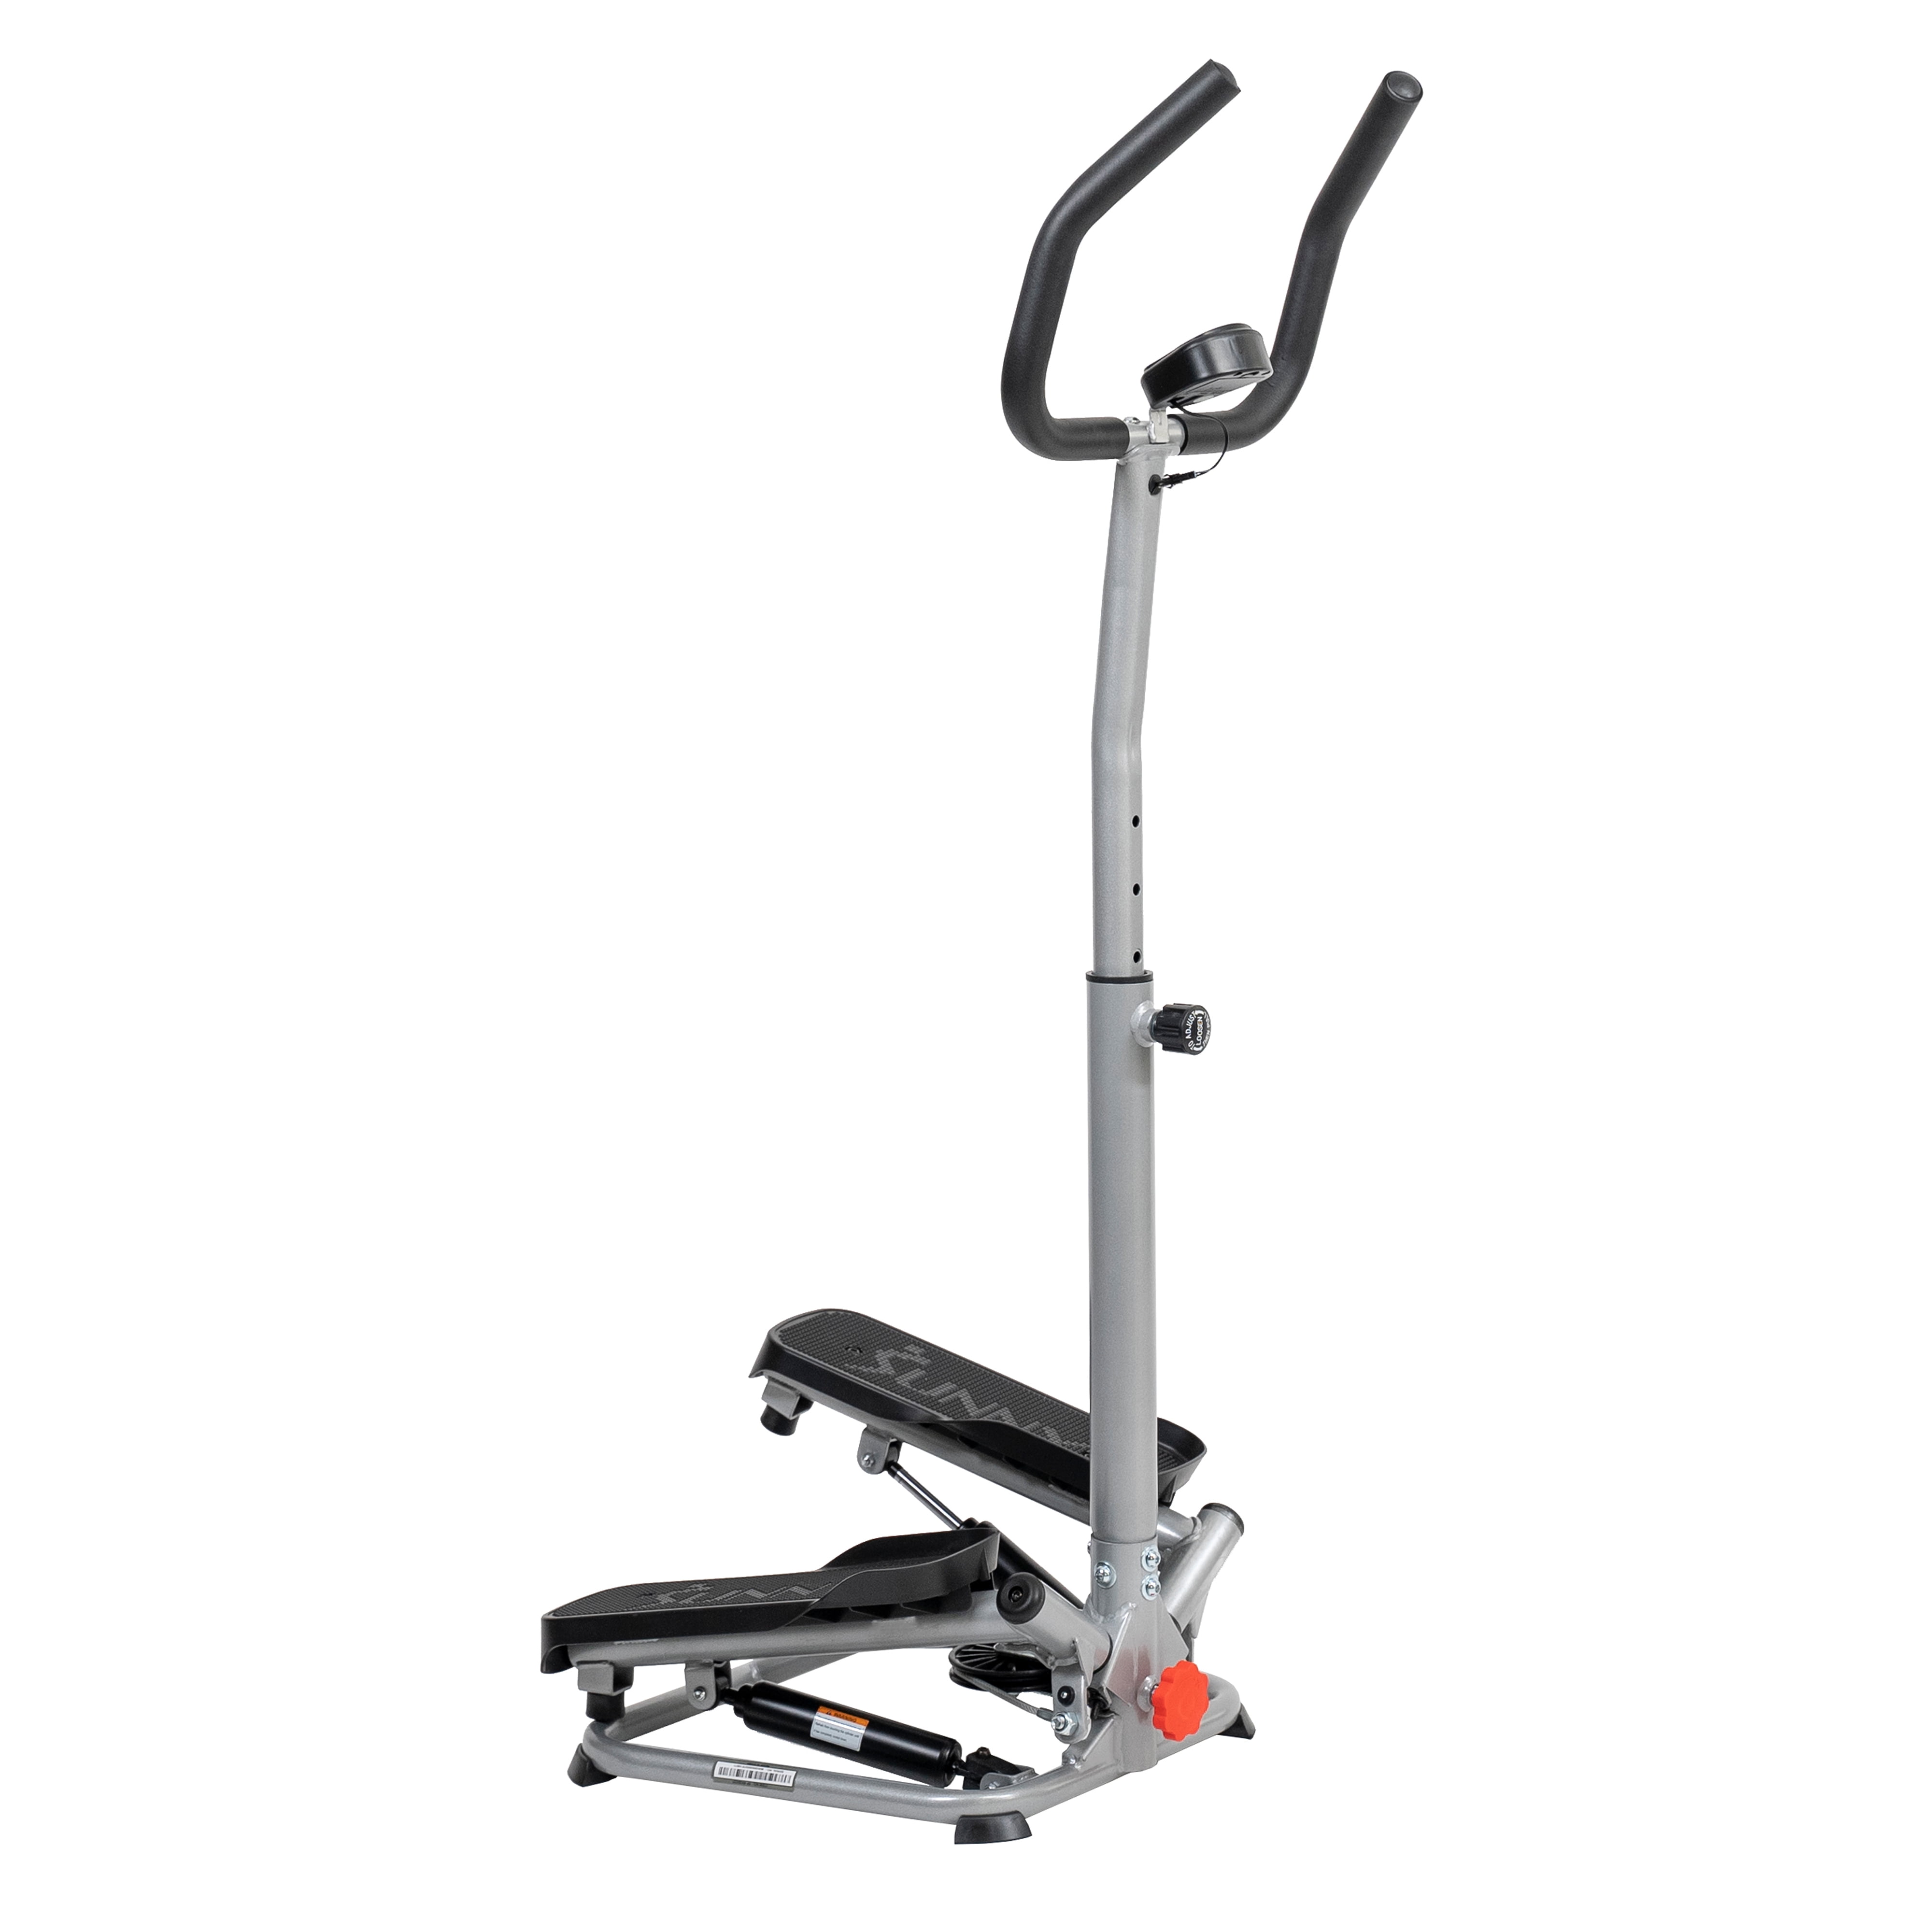 Adjustable Stepper Step Machine for Exercise Stair Stepping Machine for Home Use,Stepper Step Machine with Handle Bar and LCD Monitor,Stepper Step Machine Cardio Climber for Losing Weight 